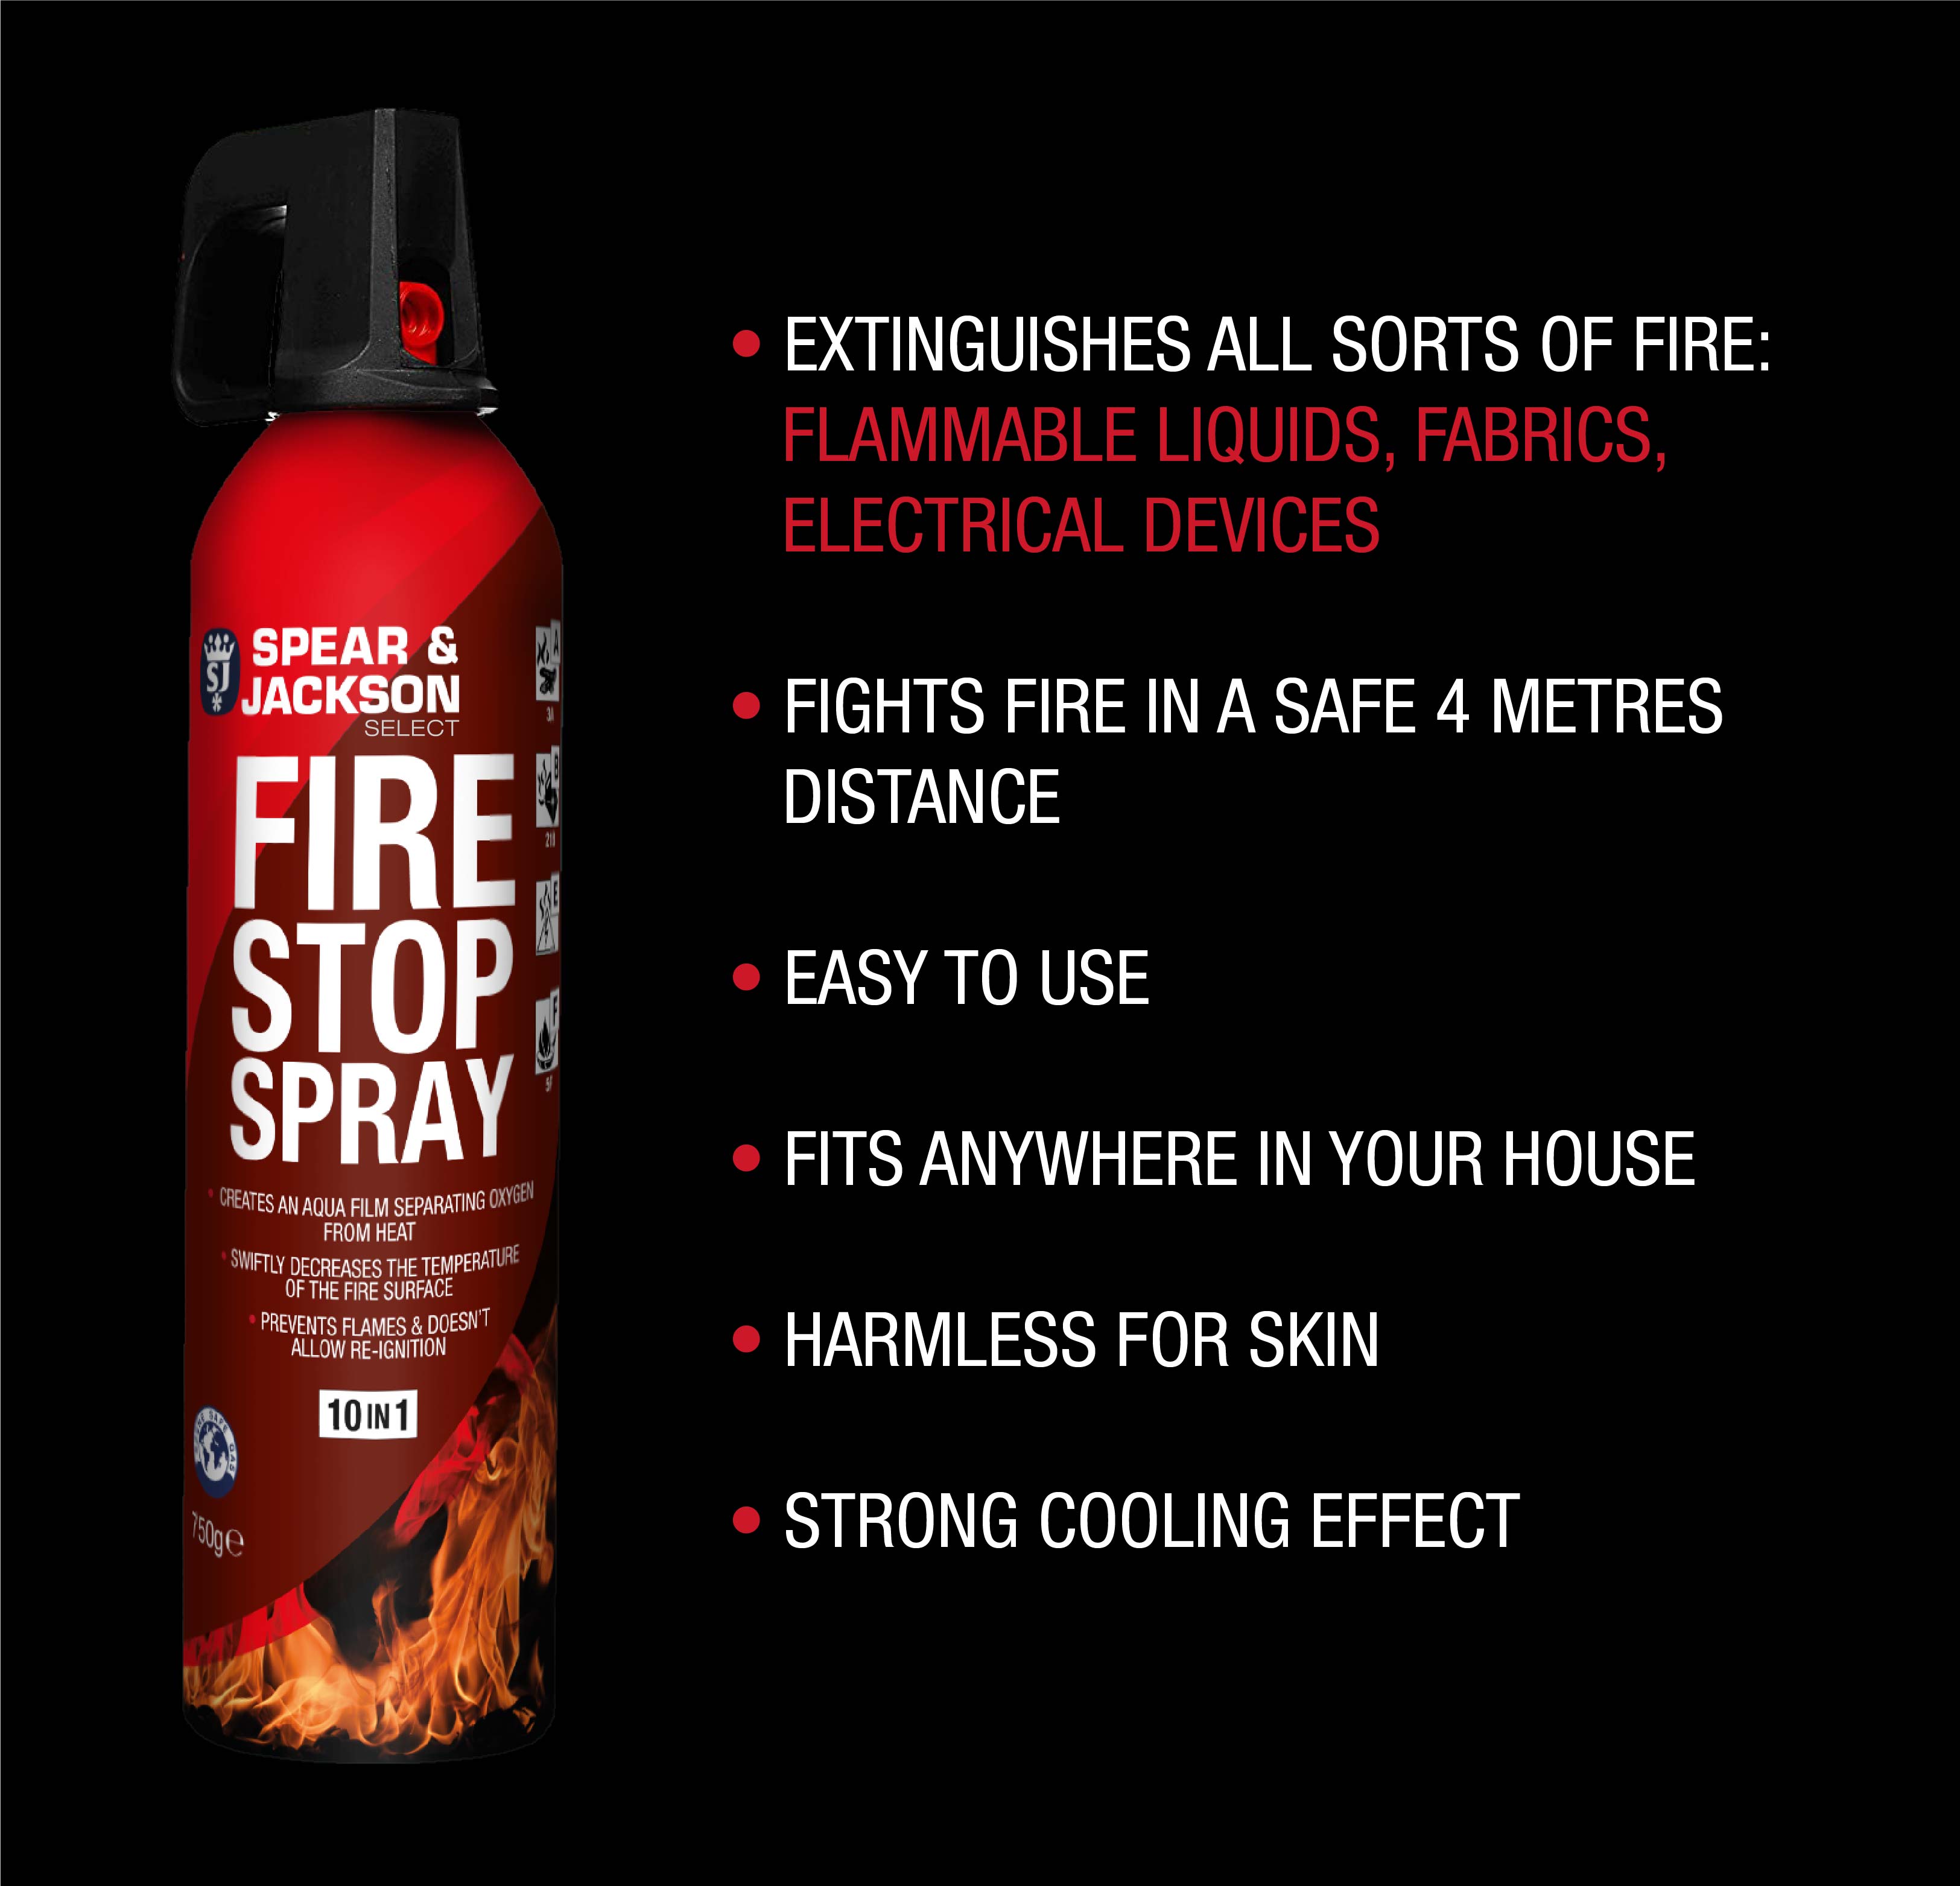 Fire Stop Spray 750g Spear and Jackson